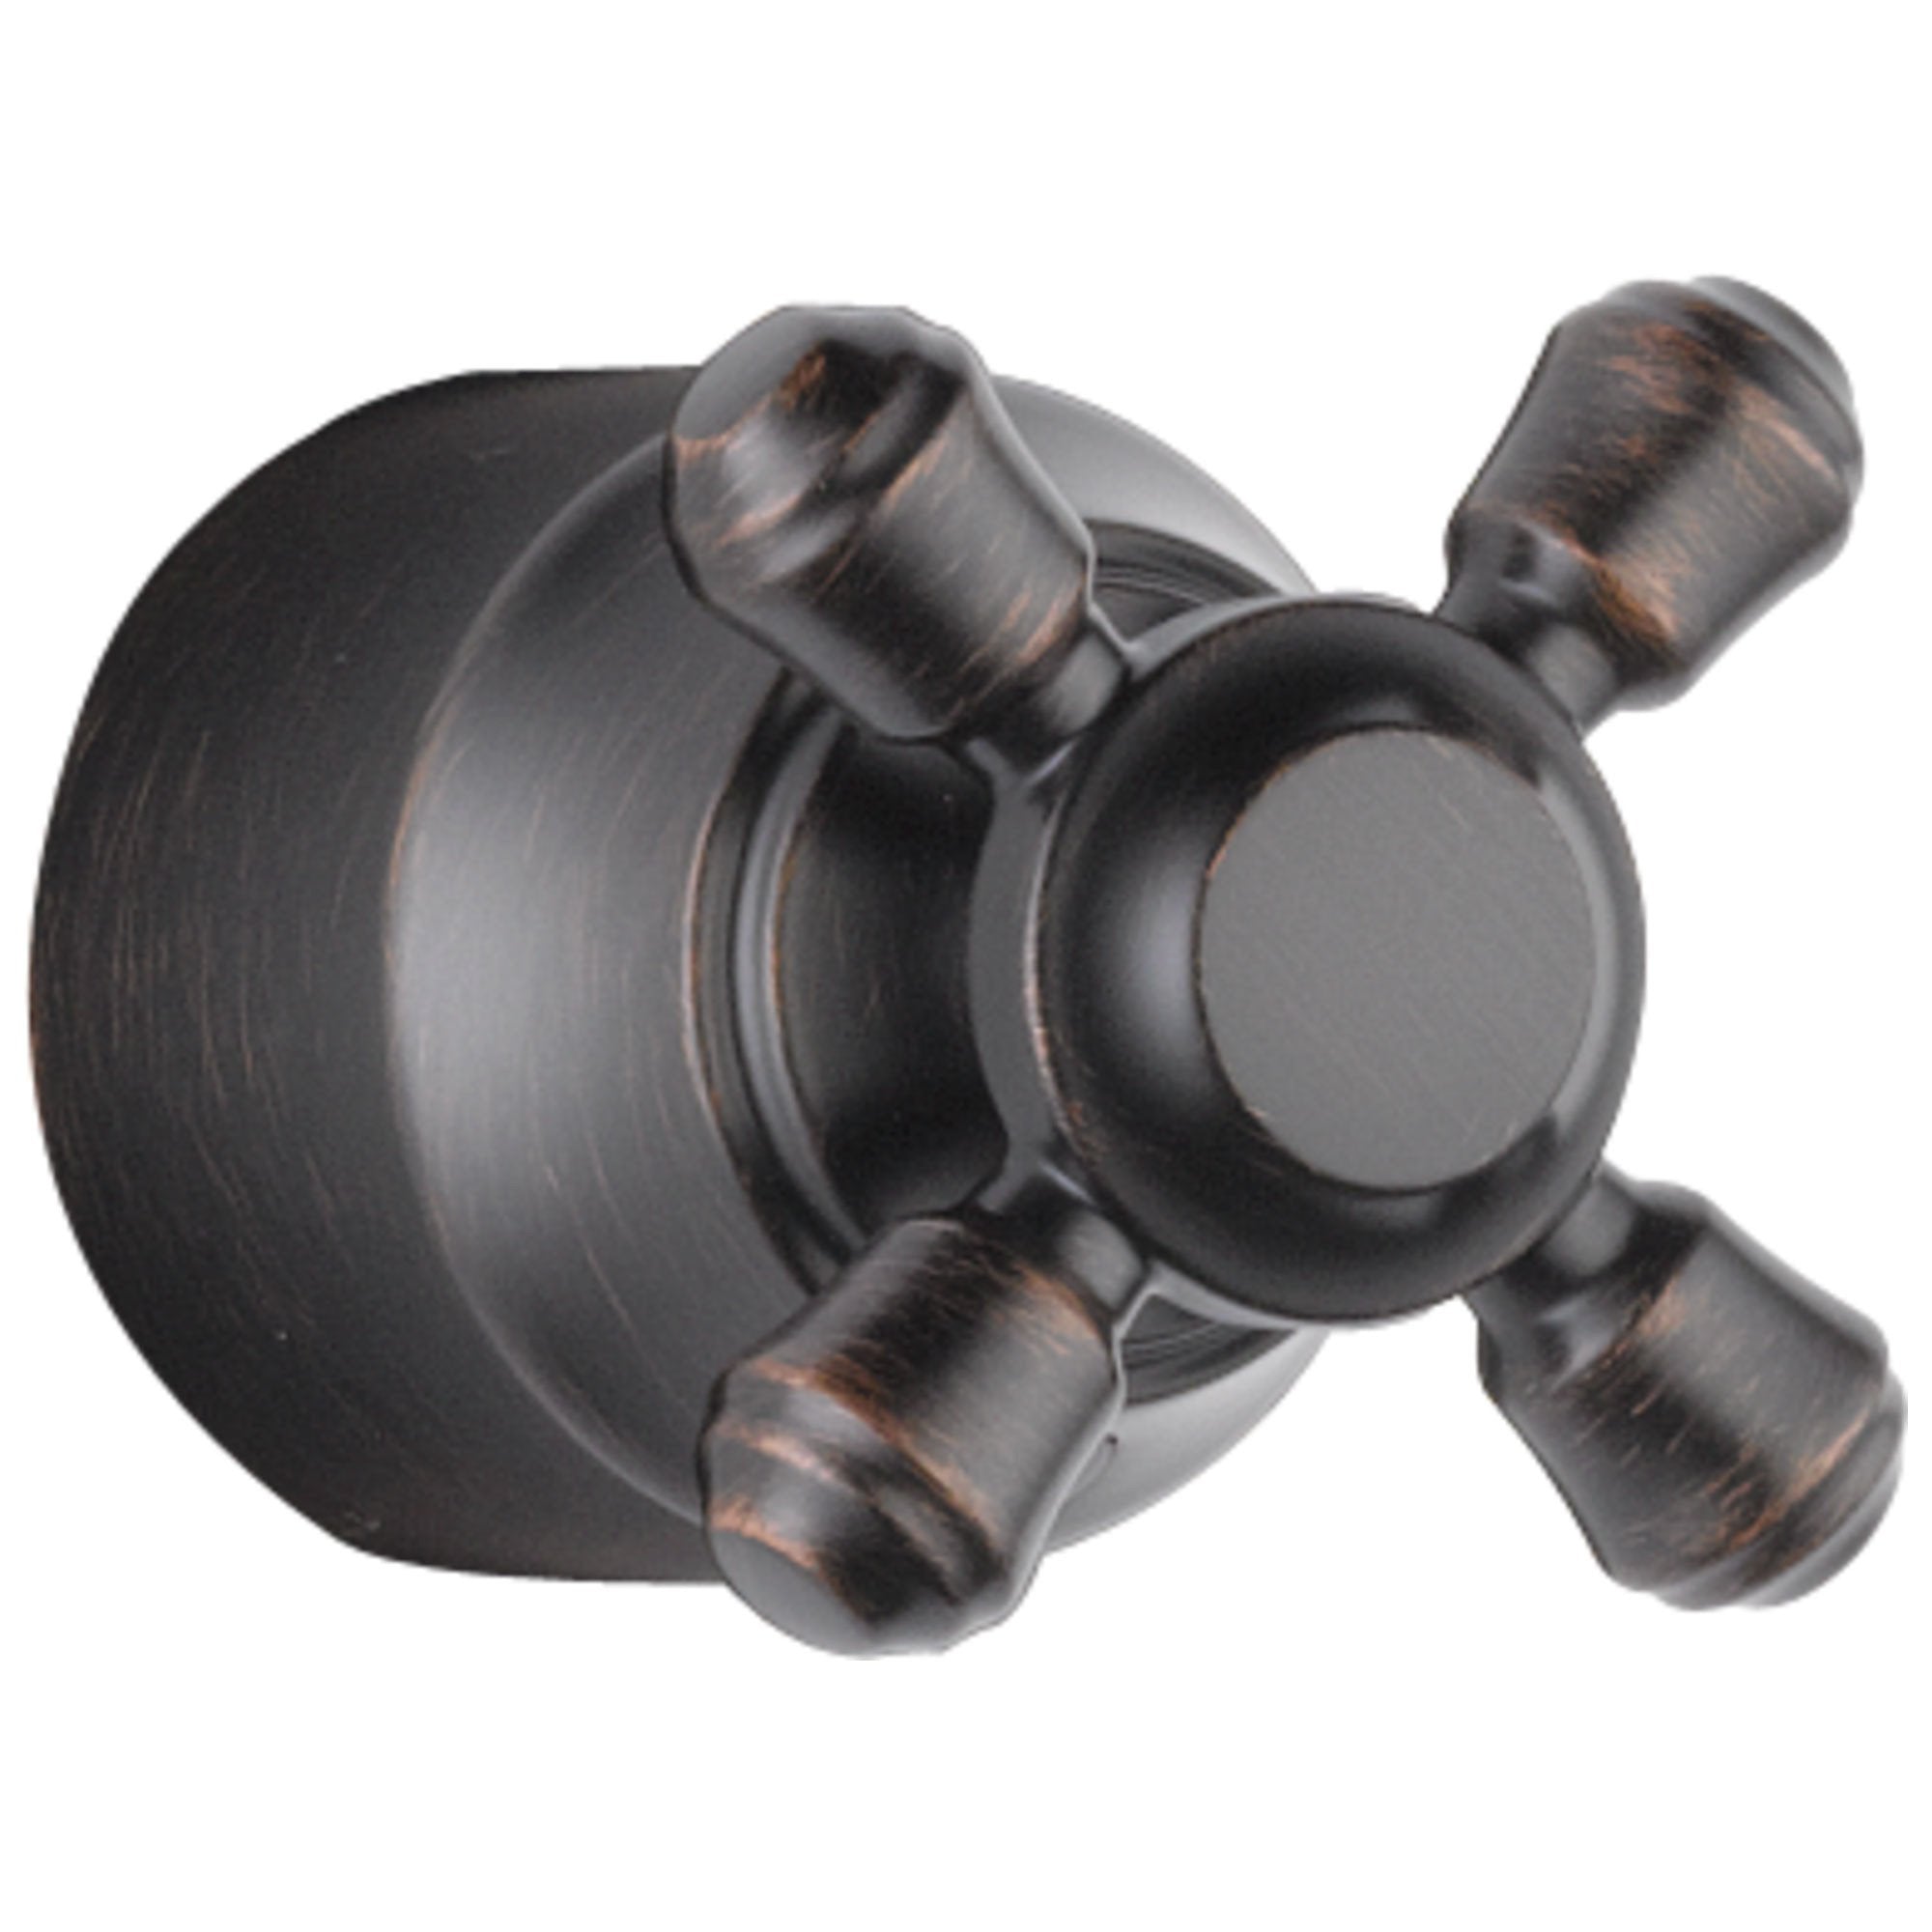 Delta Cassidy Collection Venetian Bronze Finish Diverter / Transfer Valve Cross Handle - Quantity 1 Included 579626